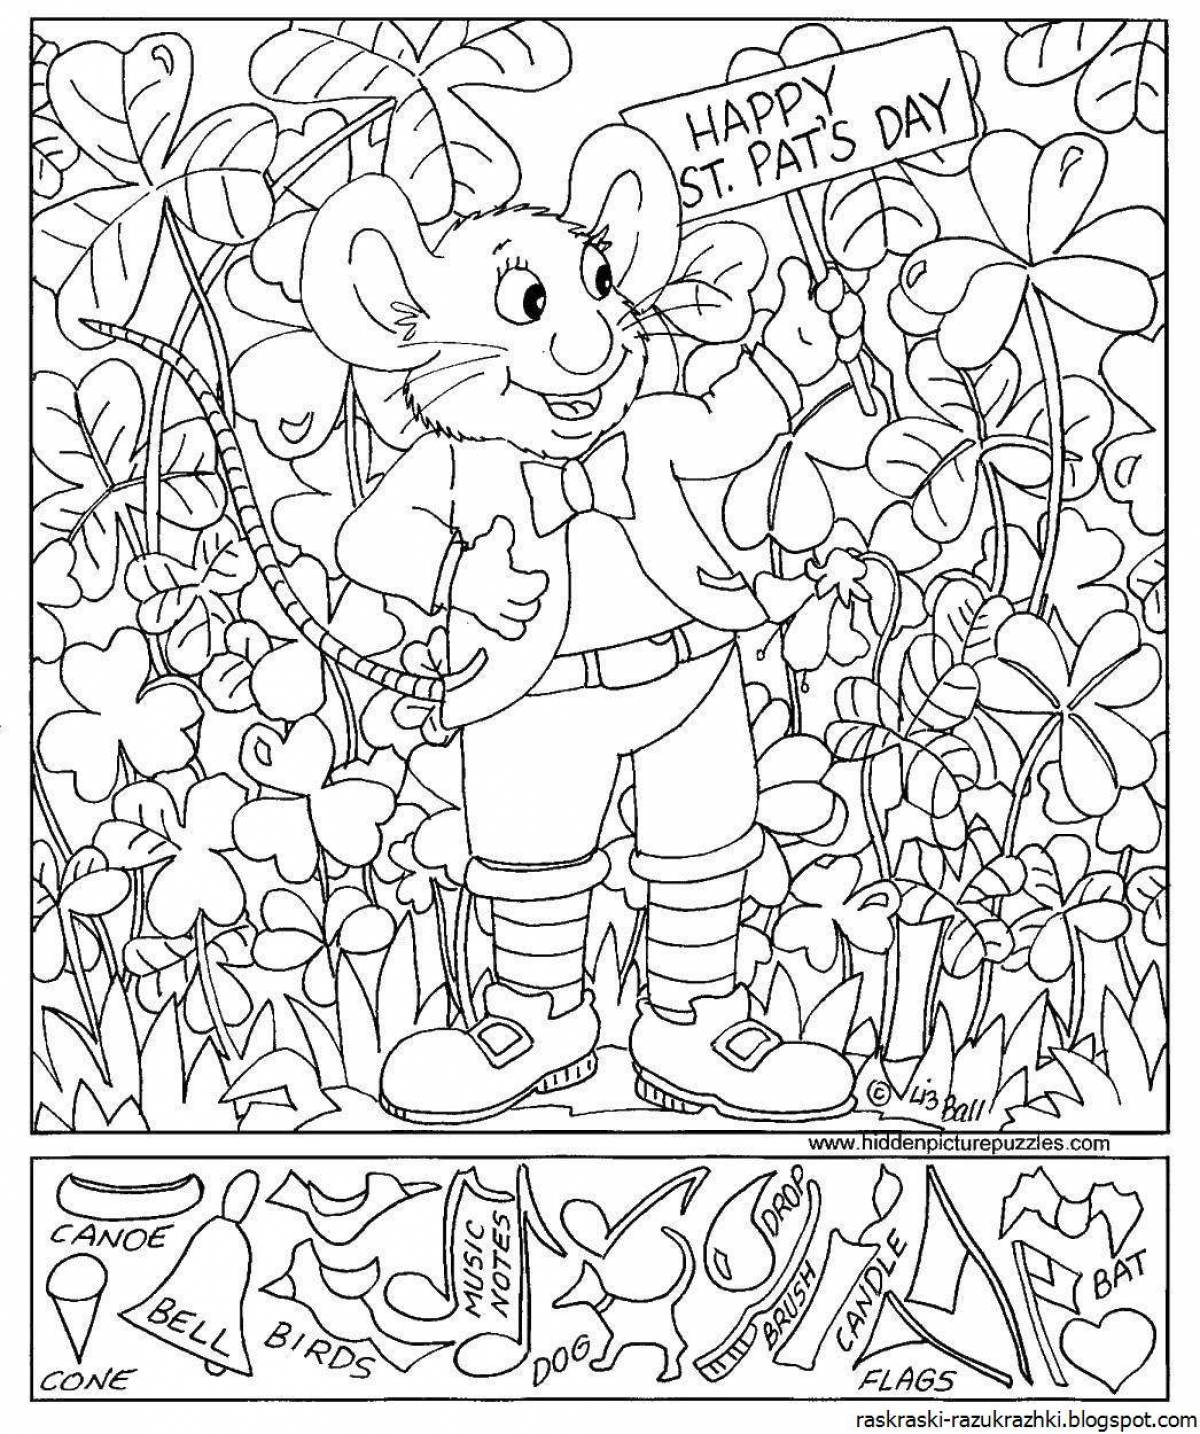 Find the coloring #1